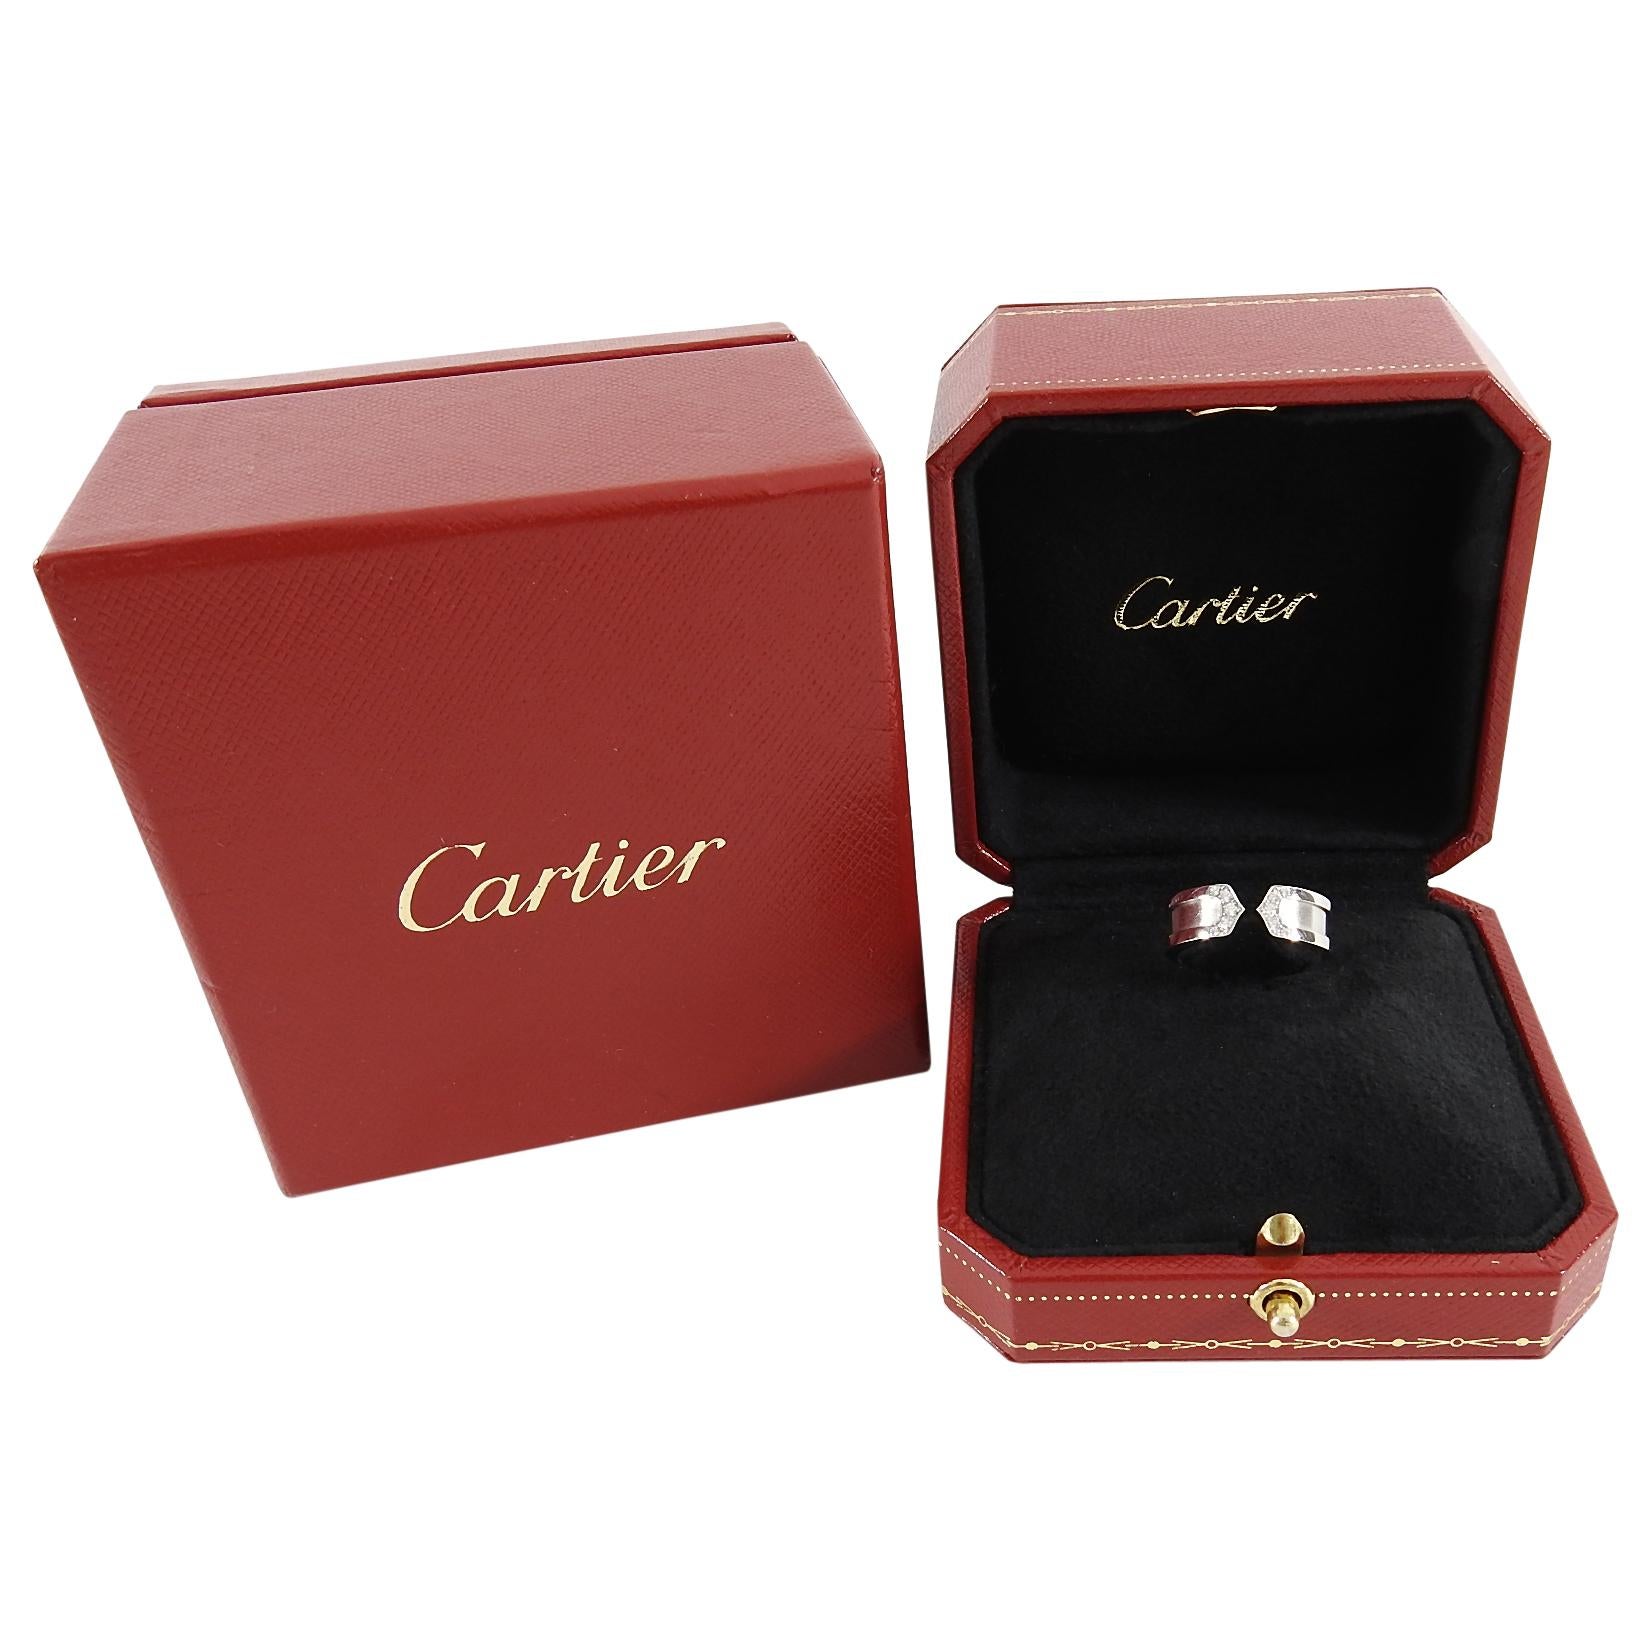 Cartier C de 18k White Gold Diamond Band Ring.  Original retail $3100 USD. Sleek 18k white gold band with classic C de Cartier design embellished with 10 white diamonds.  Marked size 52 (USA 6). 6mm wide. Includes original case and box. Excellent